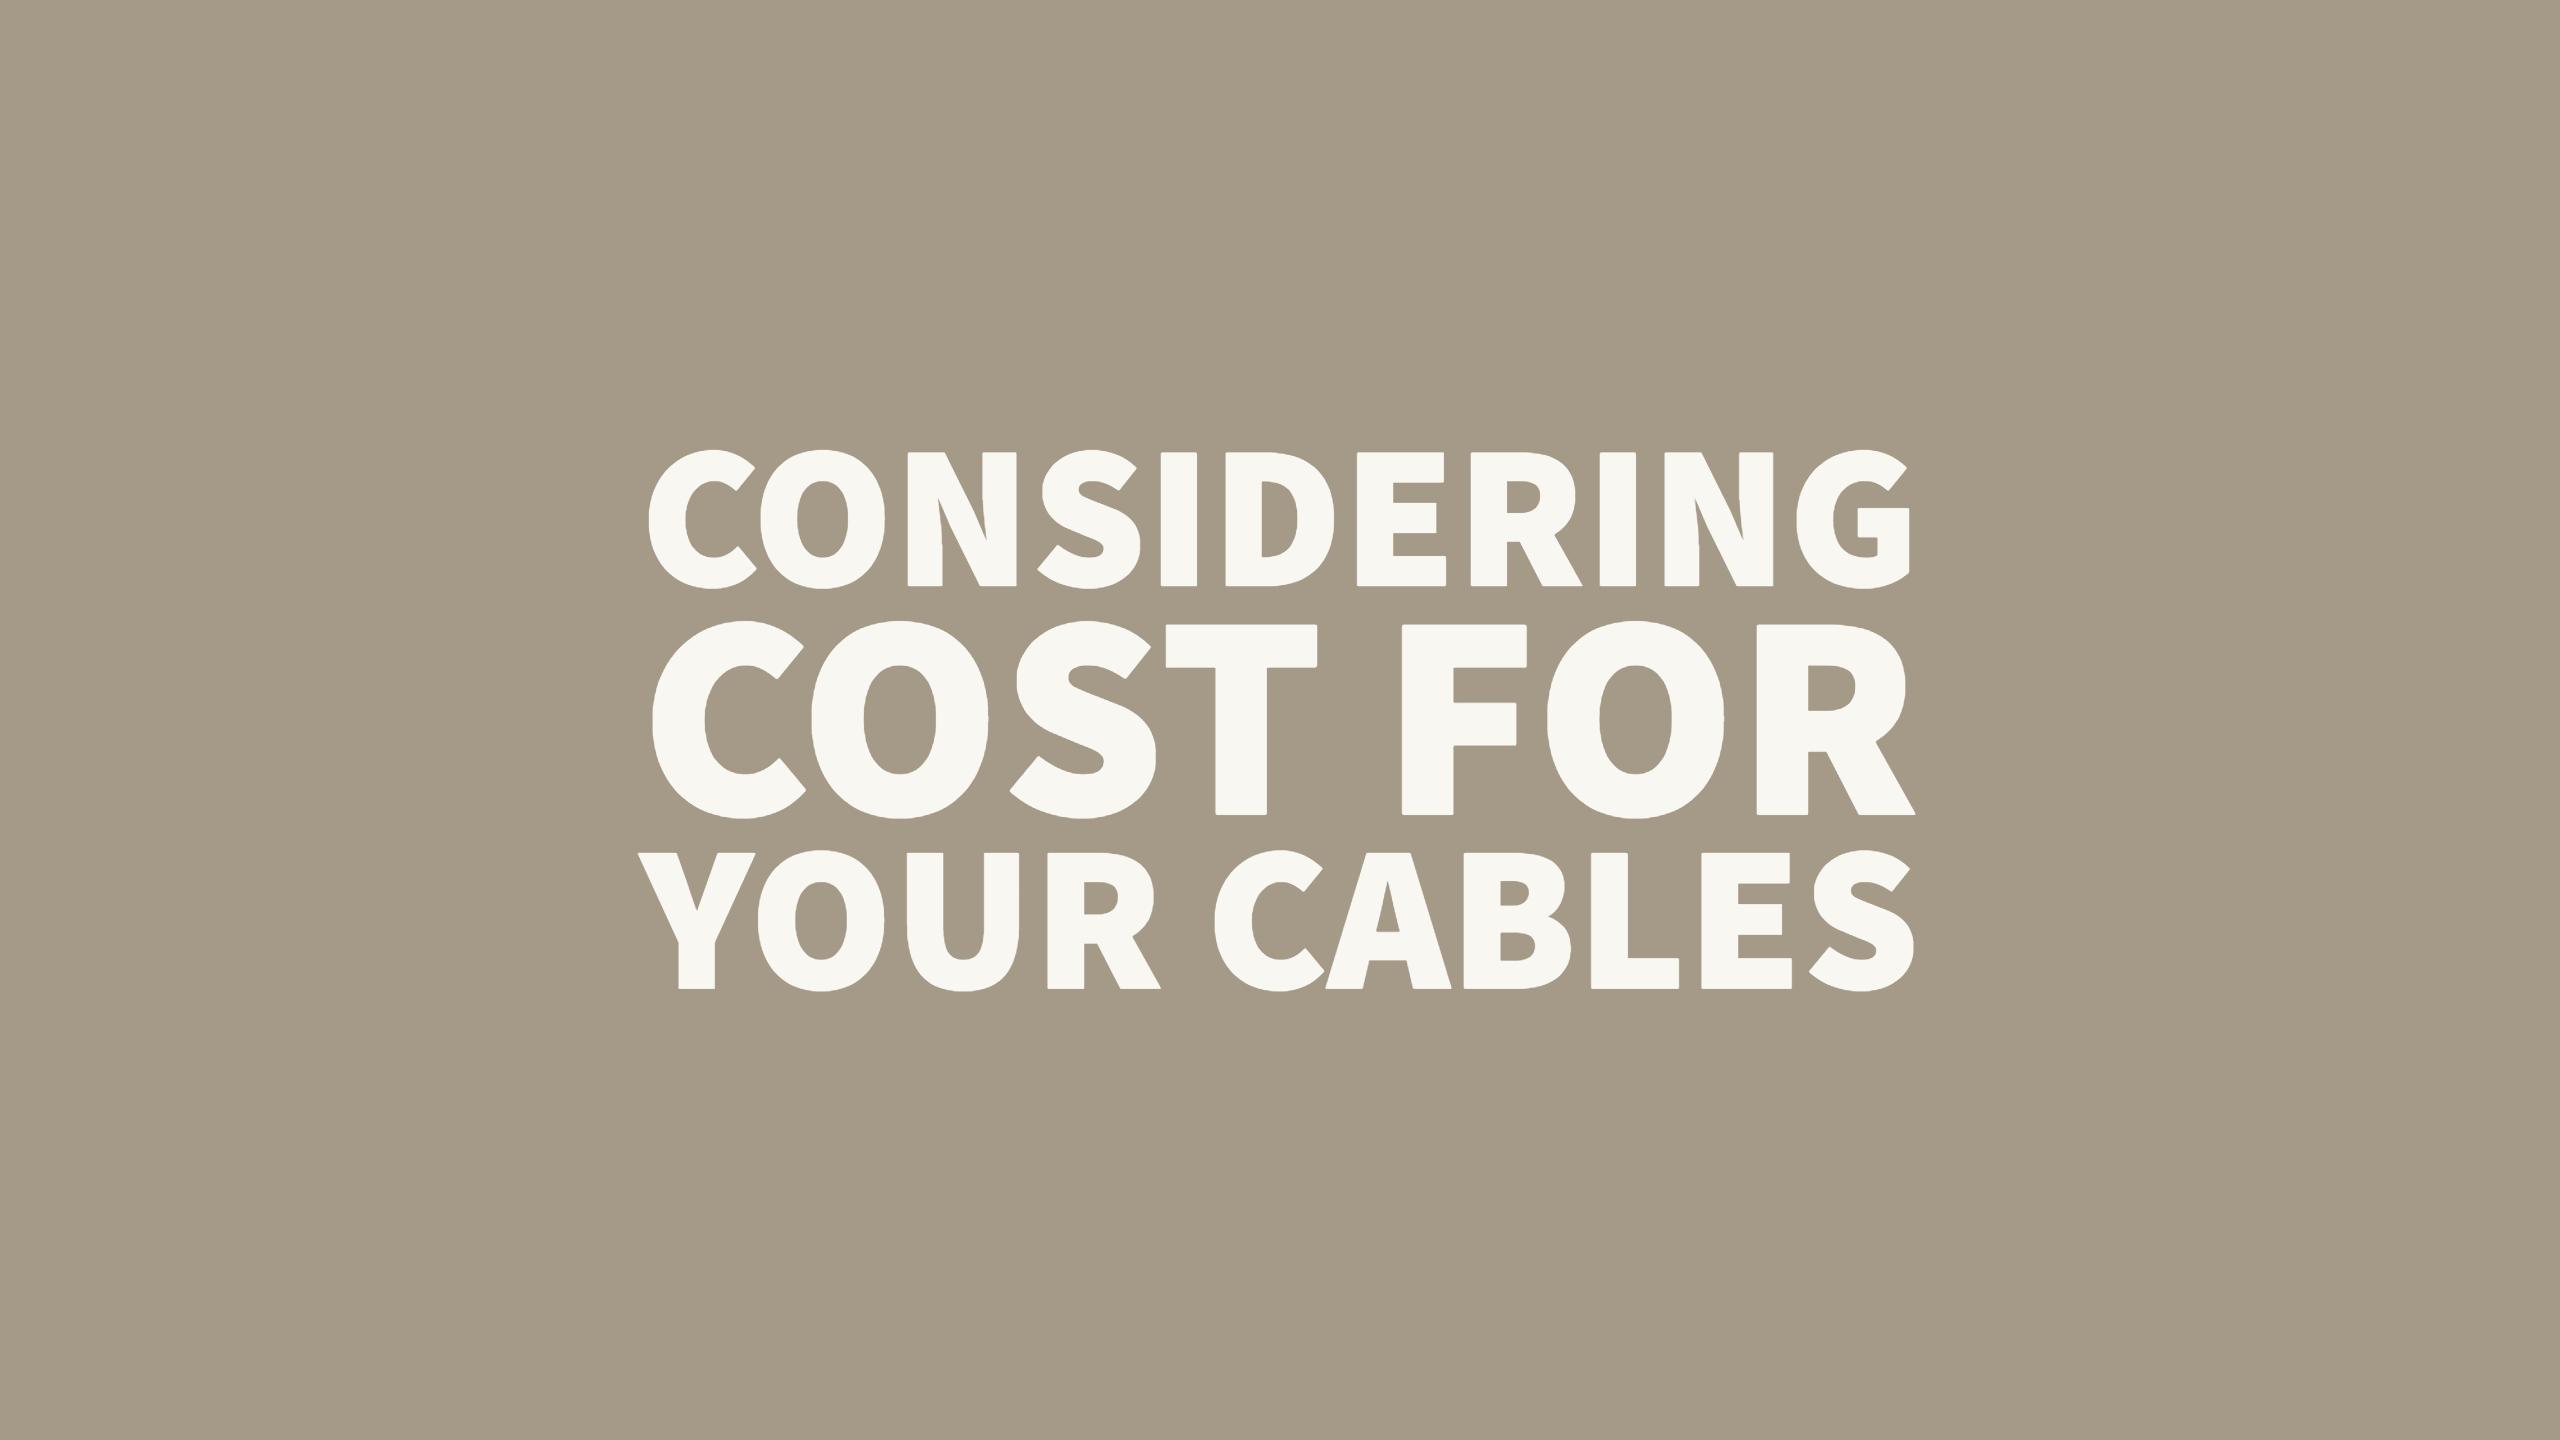 Cable costs to consider